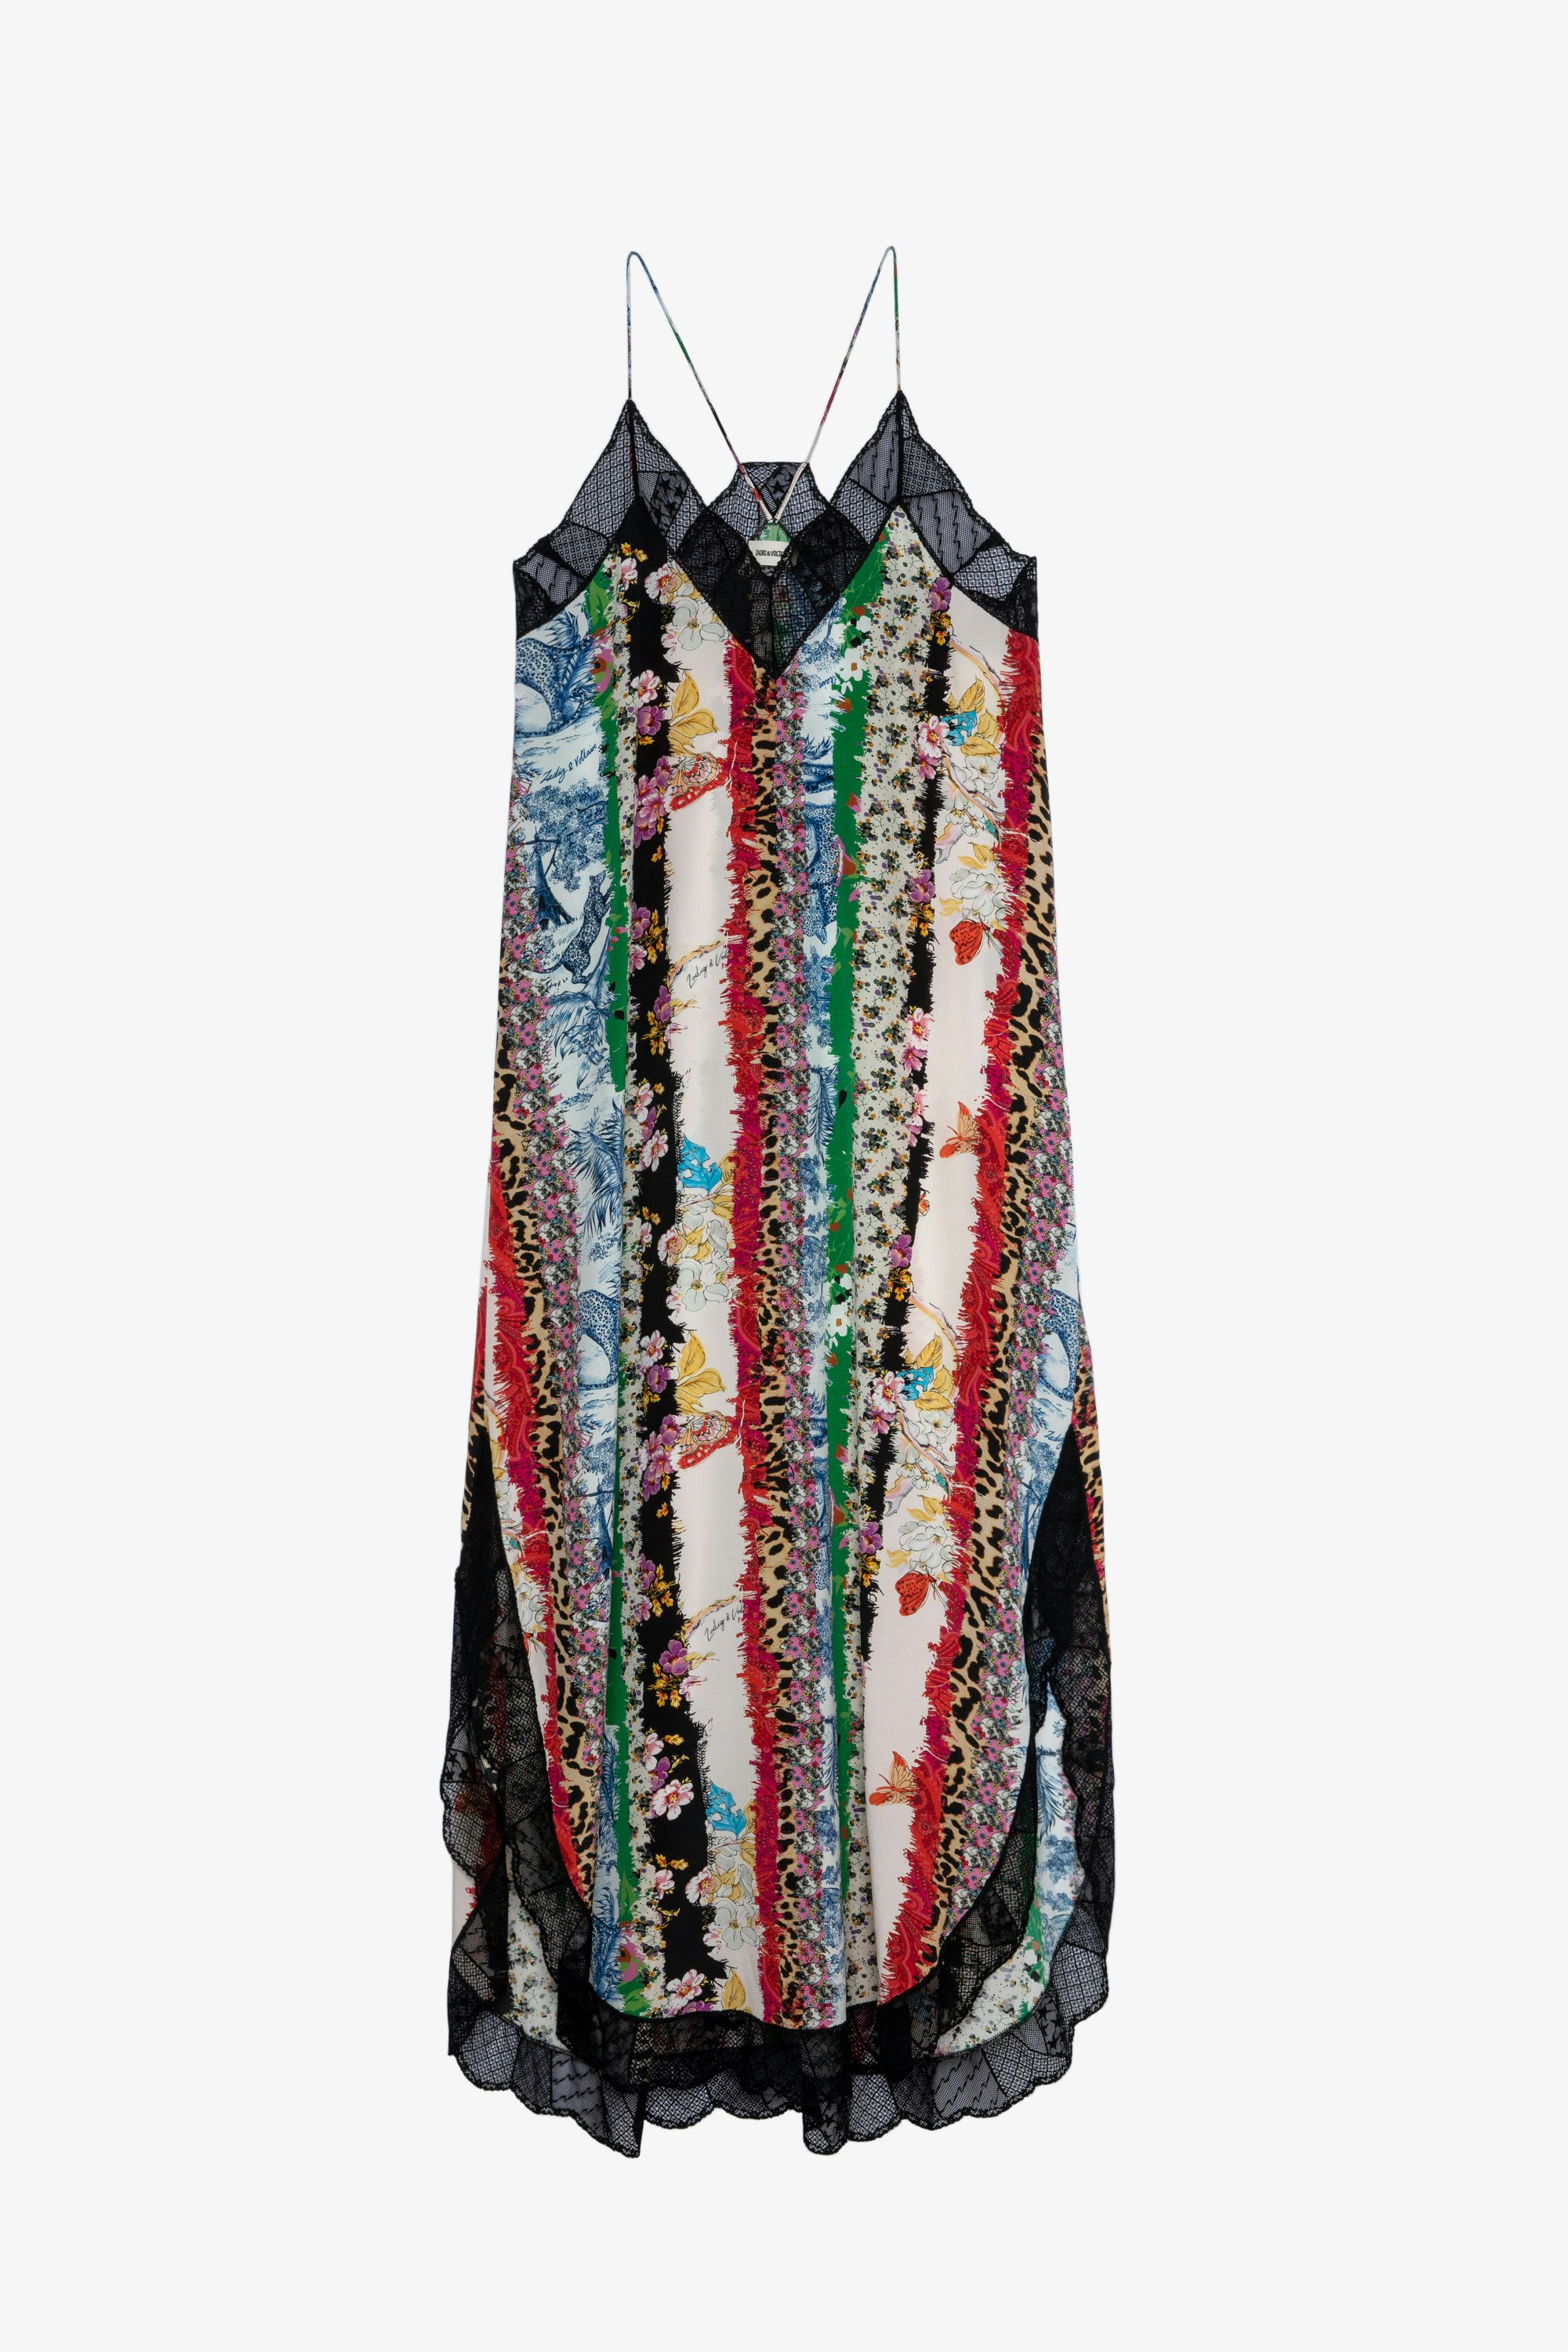 Mixed Print Ristyl Dress 25 years Women’s long dress with thin straps and prints